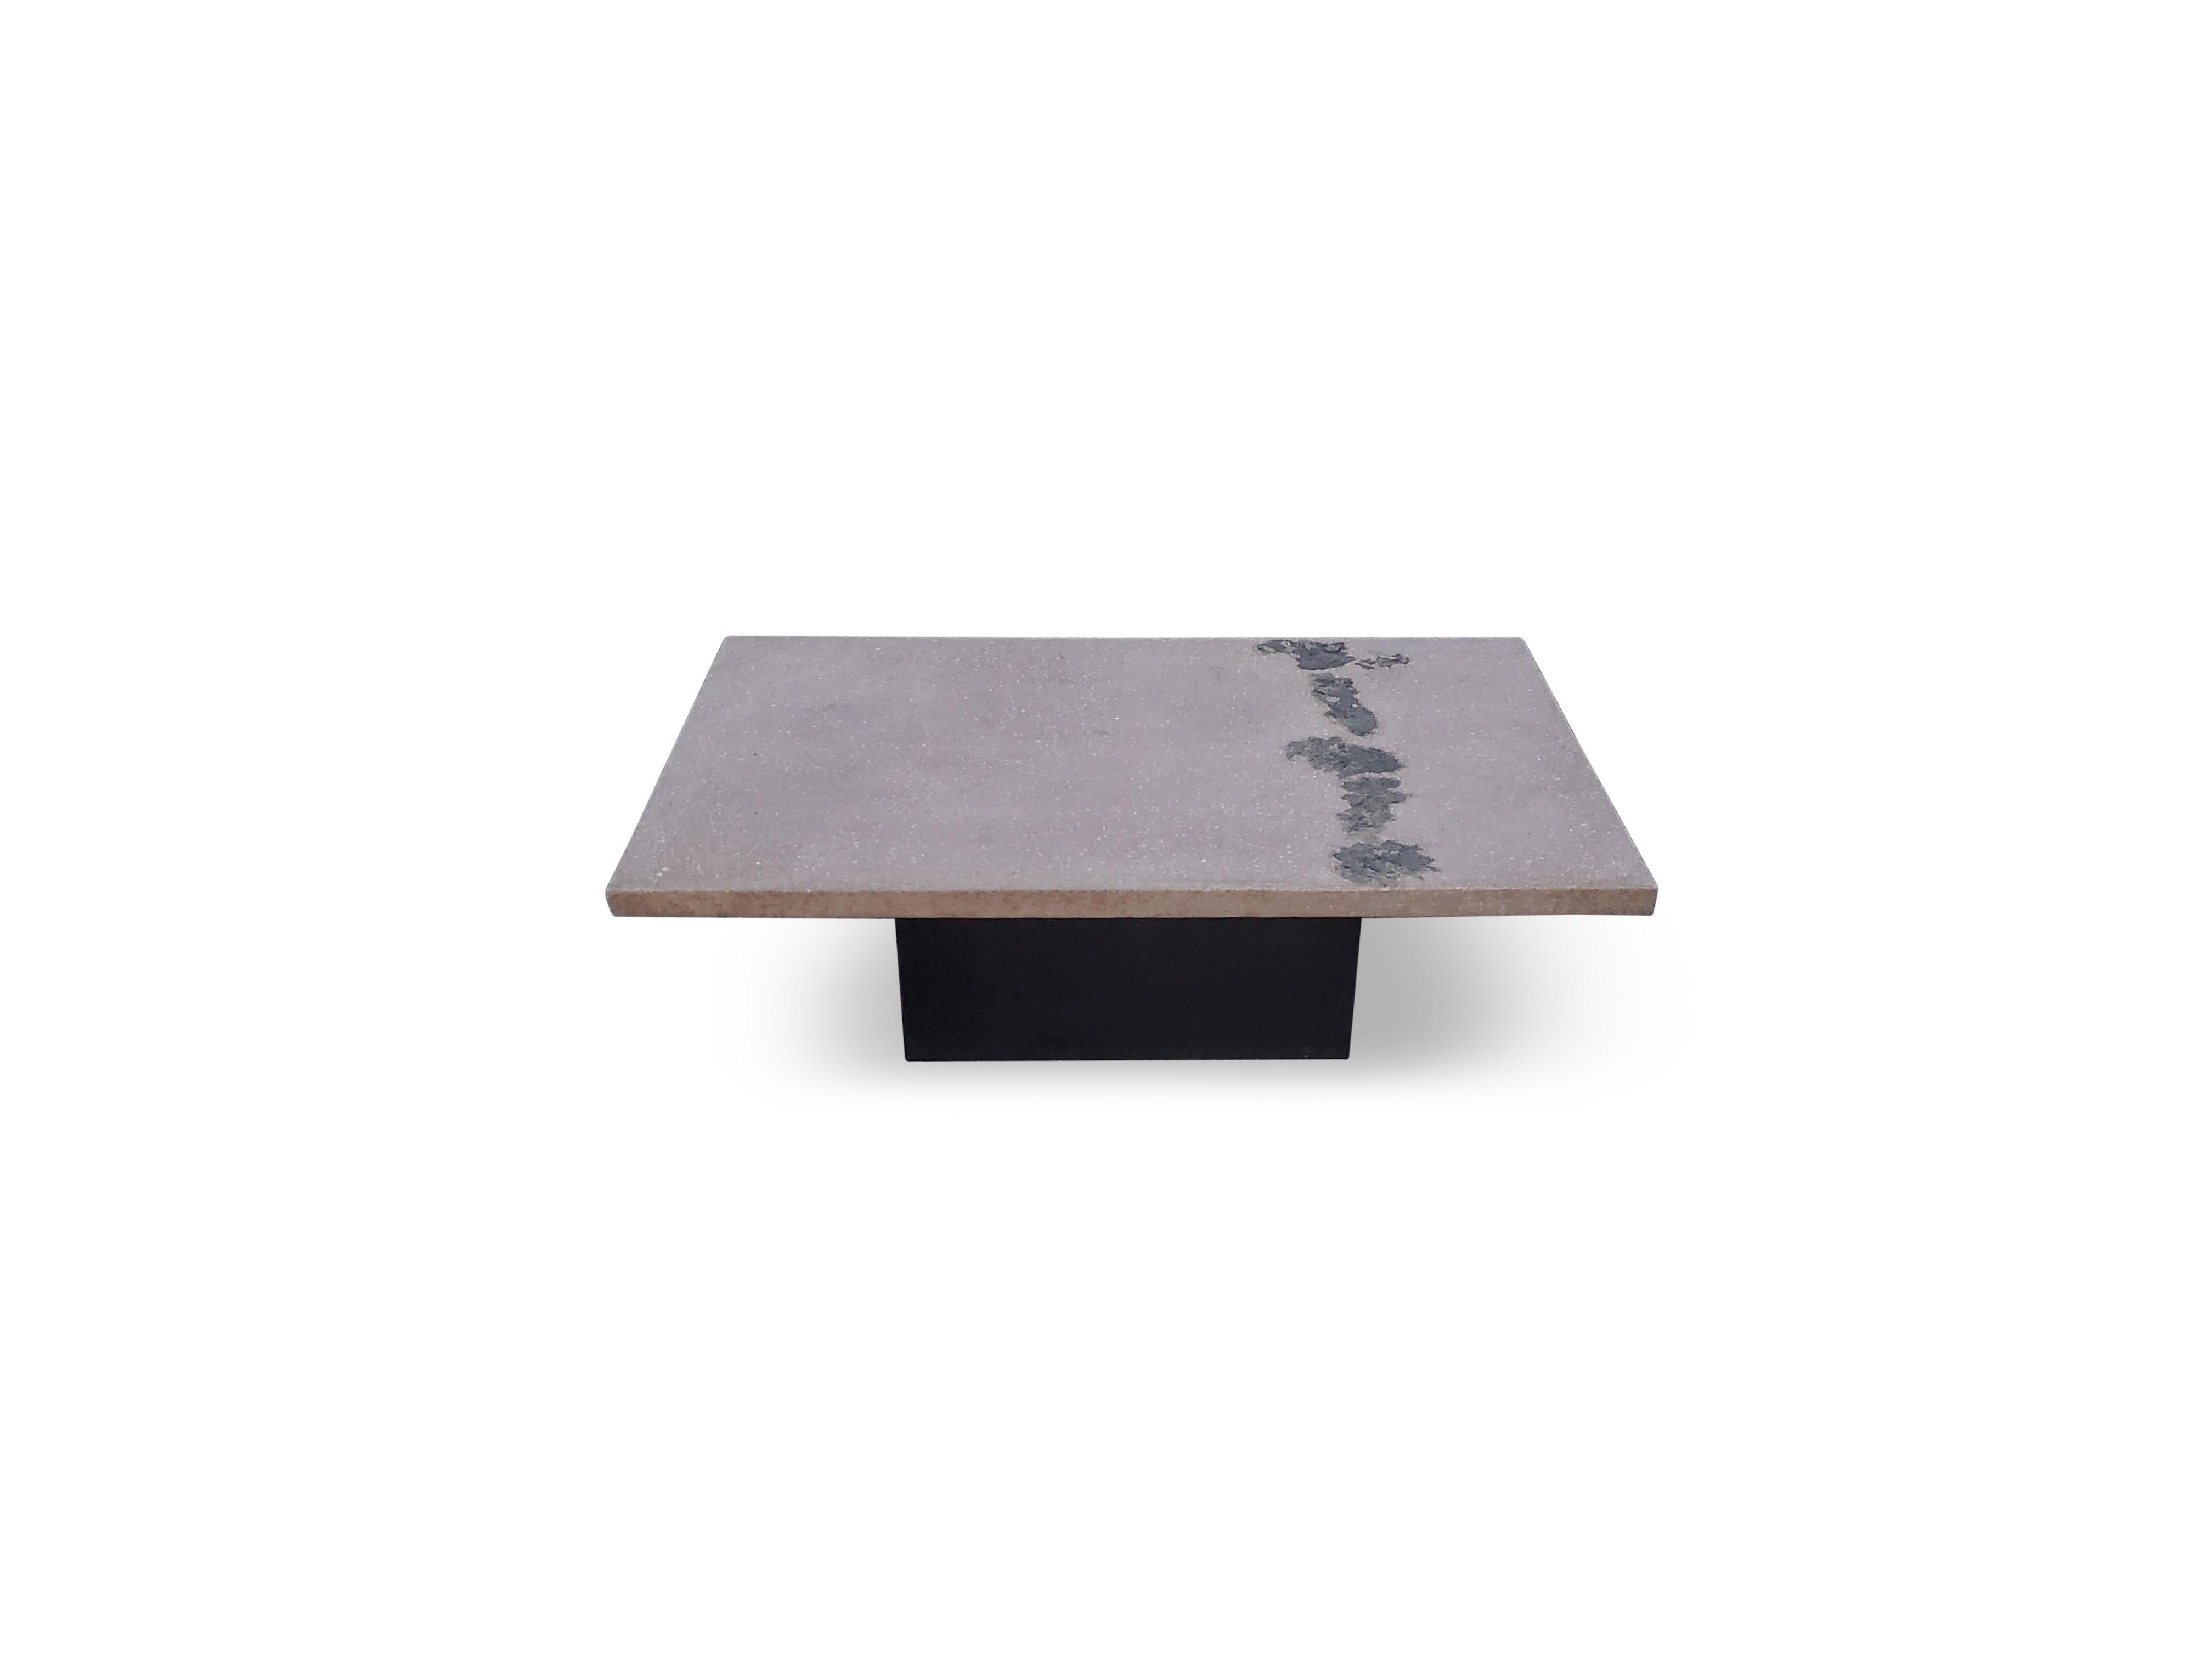 Signed Silas Seandel 'Terra' cast stone and bronze coffee table

Base is signed and dated 1979.